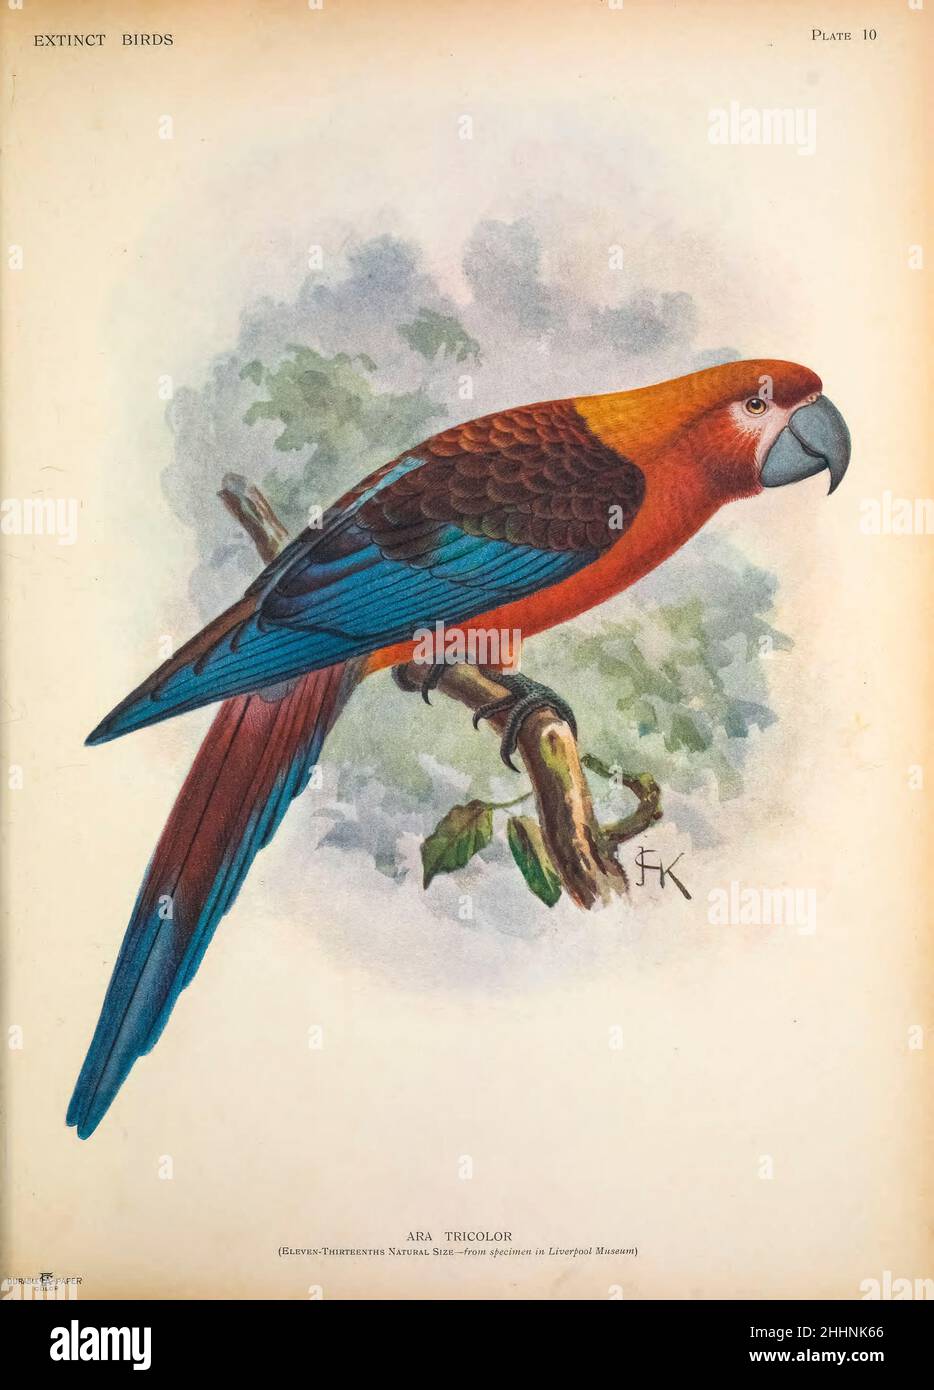 Hispaniolan macaw (Ara tricolor) AKA Cuban macaw or Cuban red macaw by John Gerrard Keulemans from ' Extinct birds ' : an attempt to unite in one volume a short account of those birds which have become extinct in historical times : that is, within the last six or seven hundred years : to which are added a few which still exist, but are on the verge of extinction. by Baron, Lionel Walter Rothschild, 1868-1937 Published 1907 as a limited edition book in London by Hutchinson & Co. Stock Photo